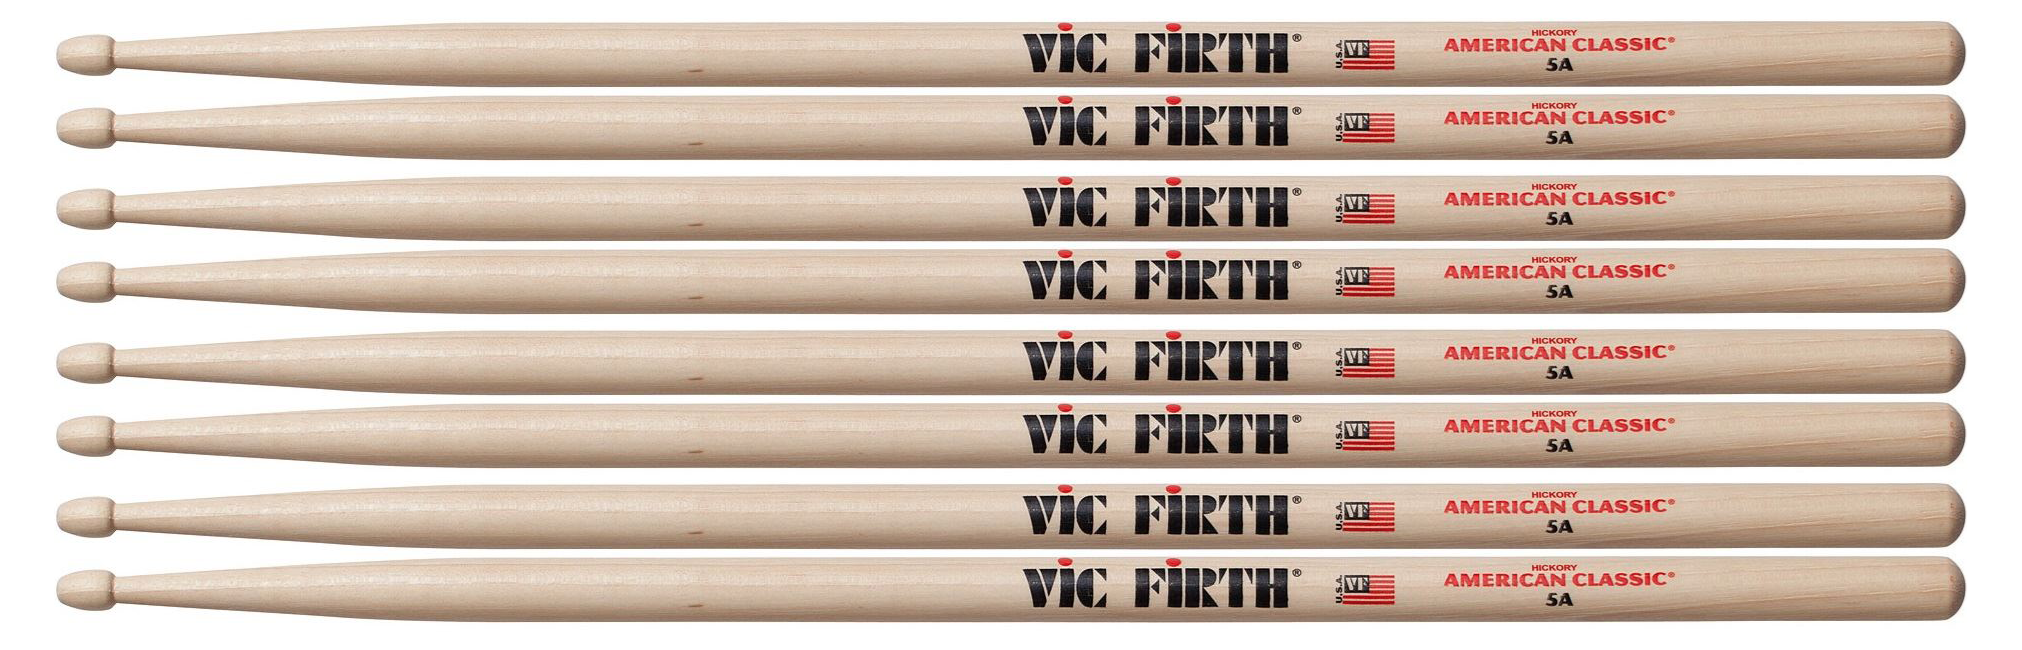 Vic Firth - 5A American Classic "Promotional 4-Pack" - Trommestikker